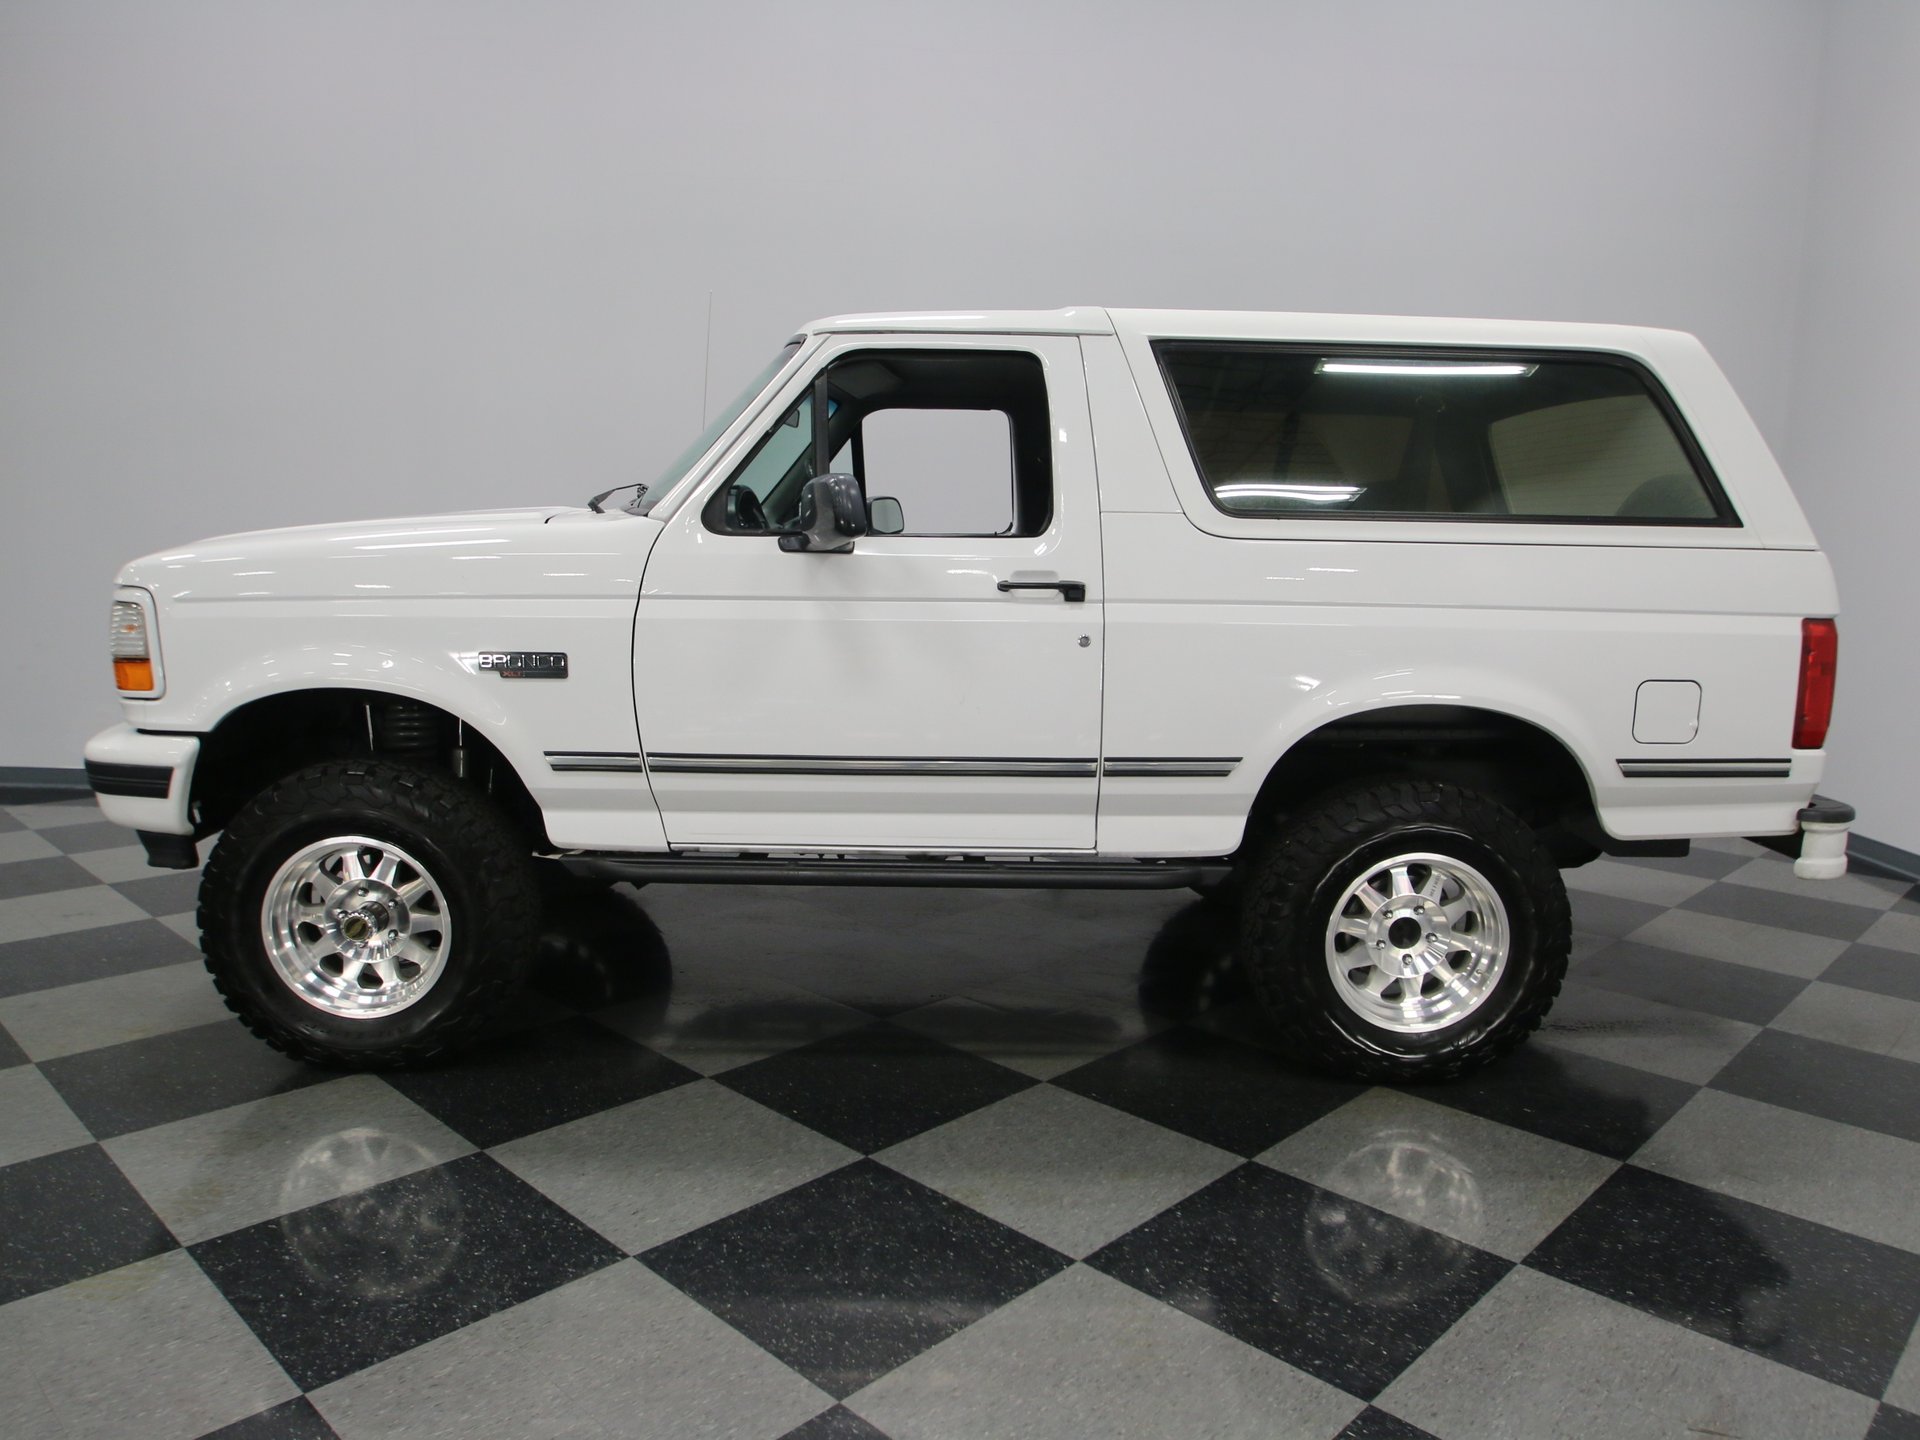 1996 Ford Bronco | Classic Cars for Sale - Streetside Classics - The